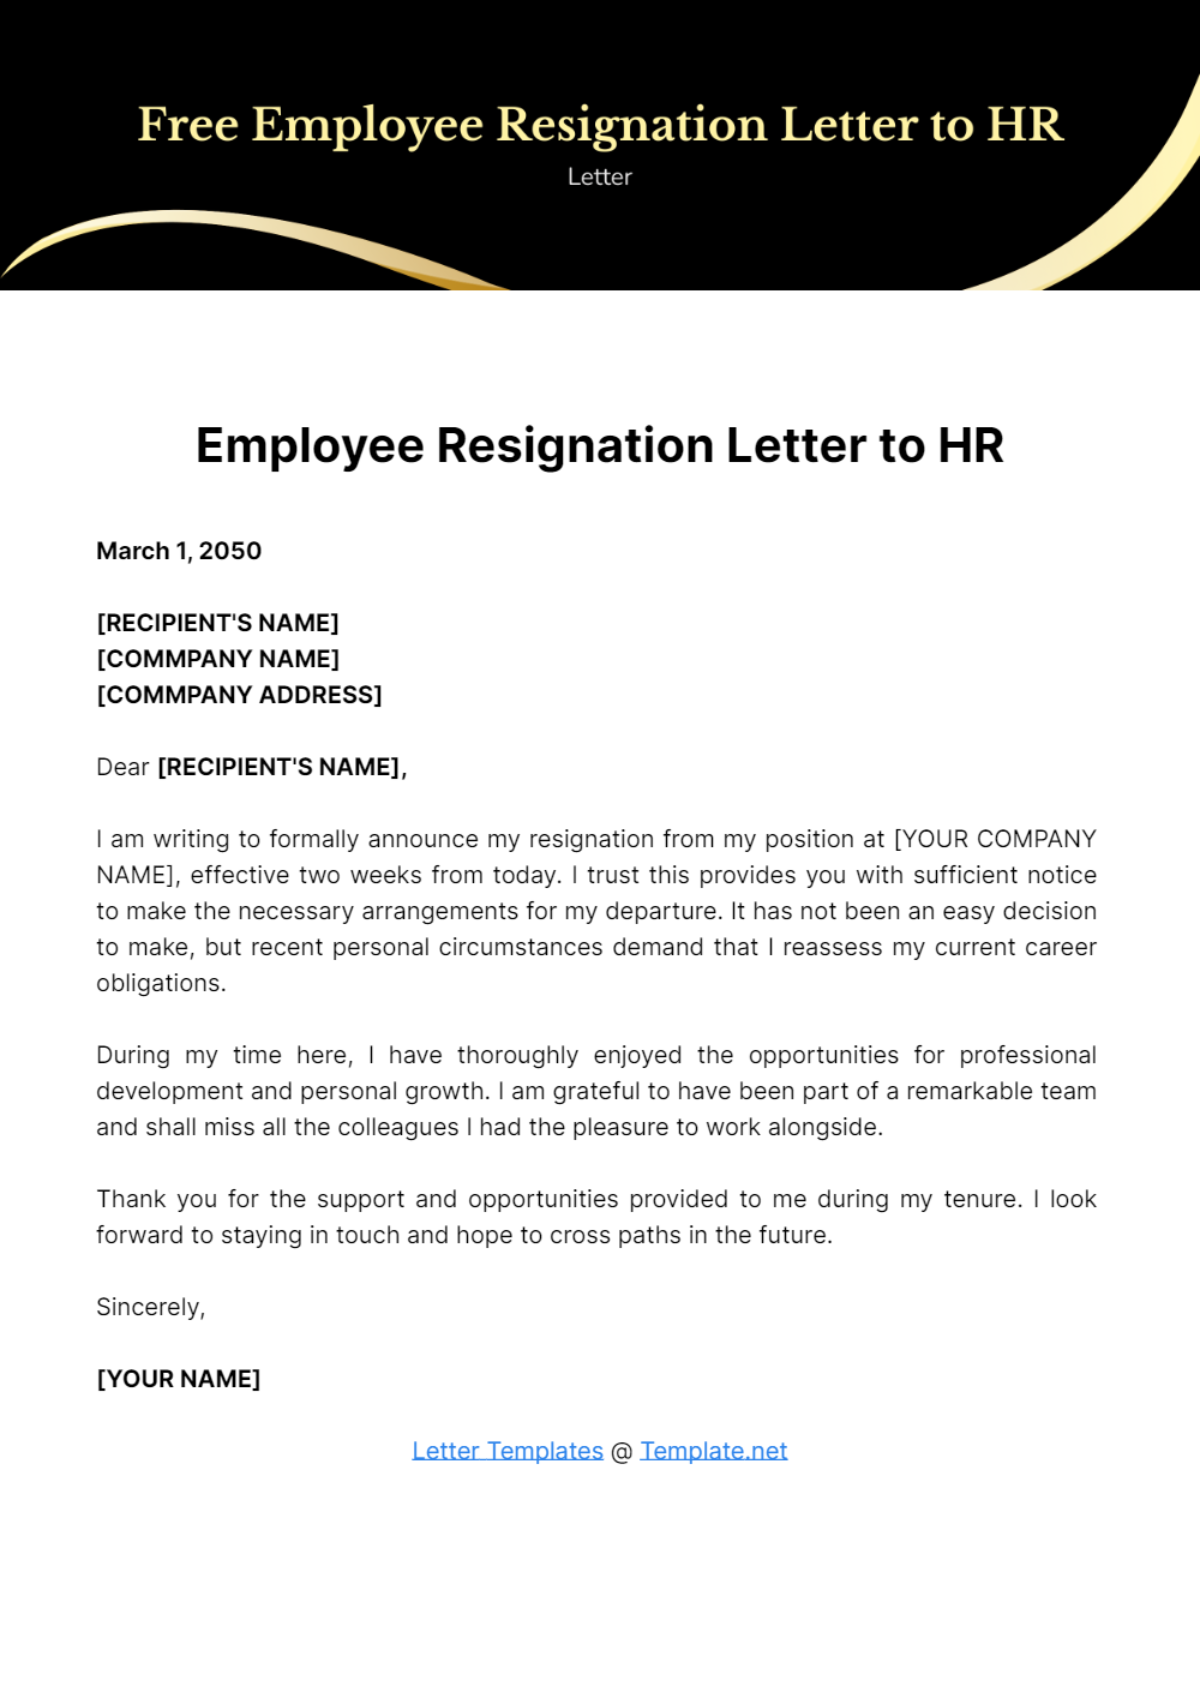 Free Employee Resignation Letter to HR Template